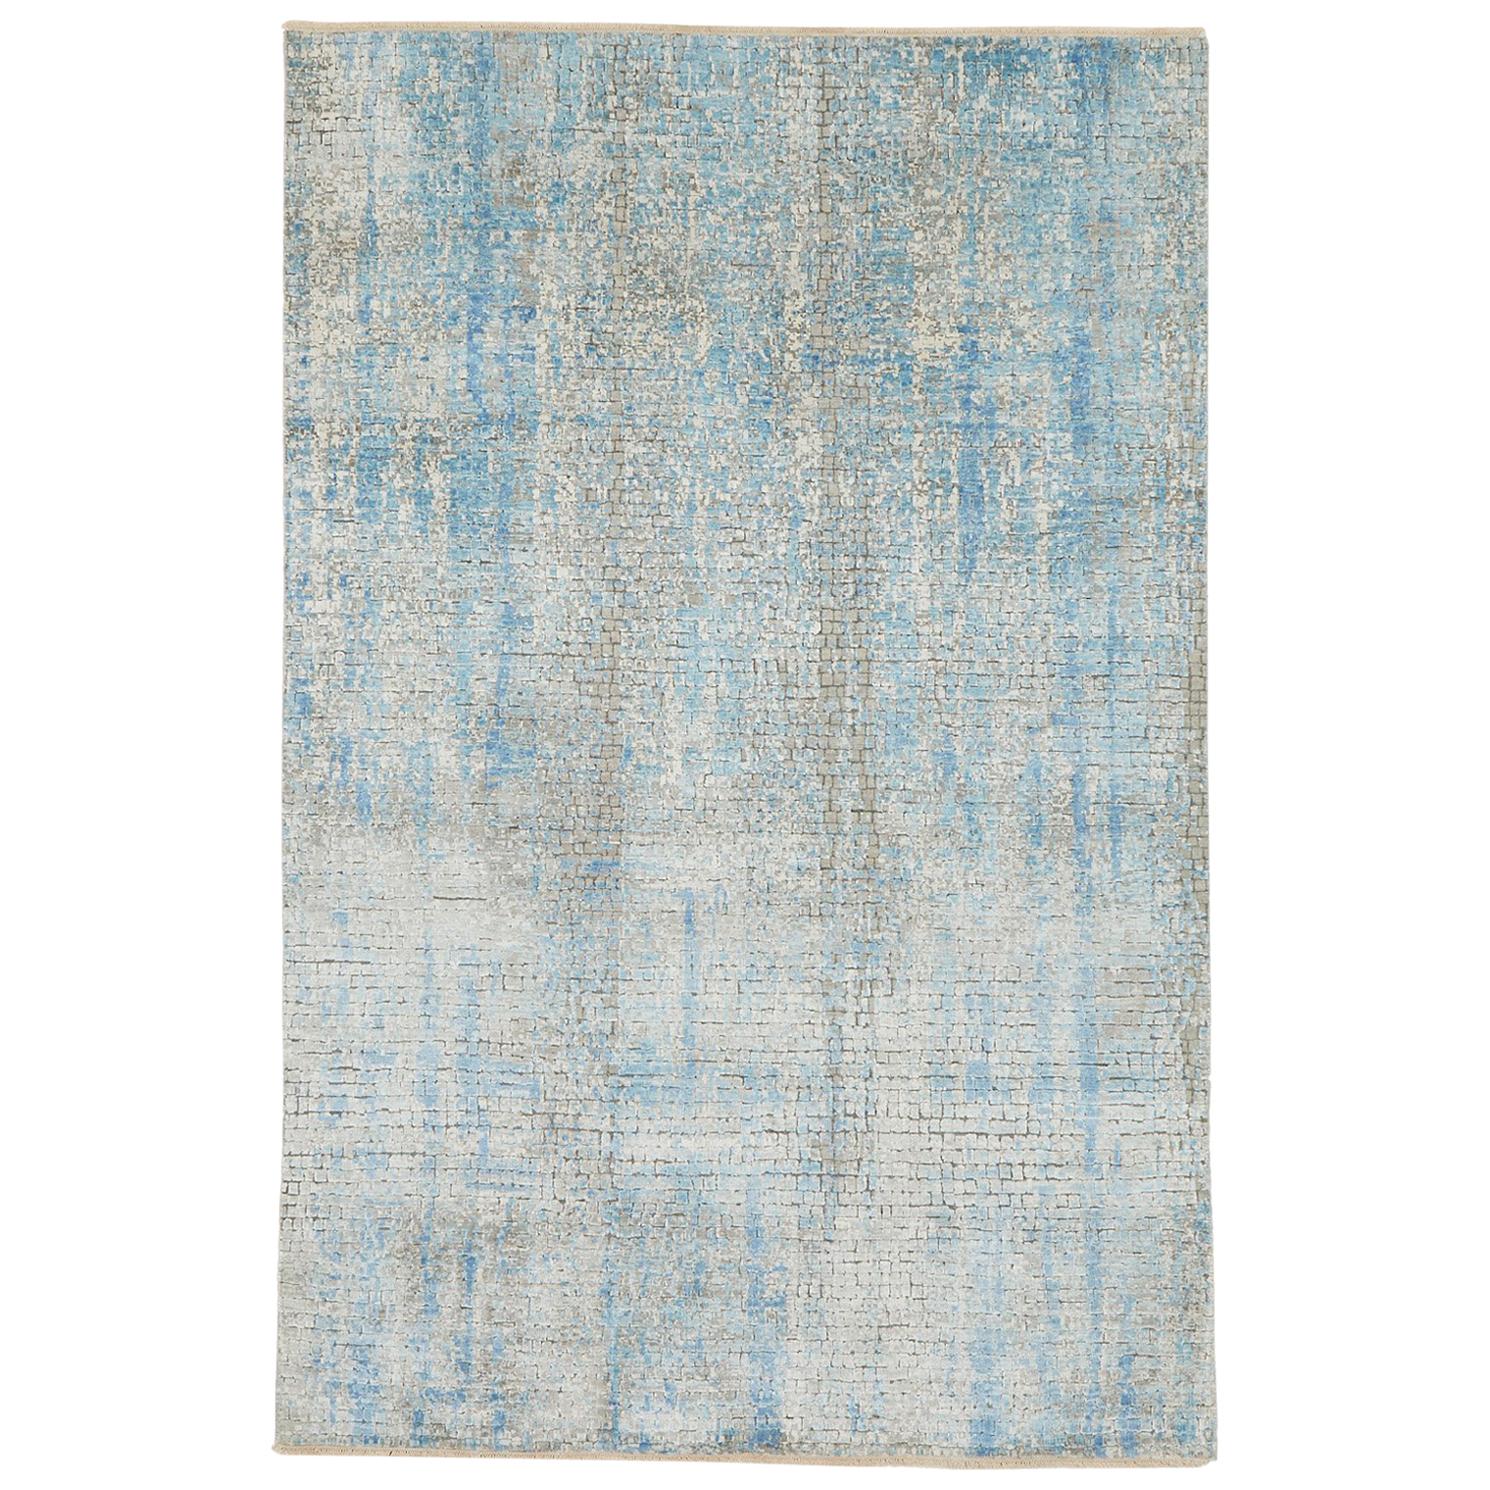 Schumacher Small Midday Rug in Hand-Knotted Wool by Patterson Flynn Martin